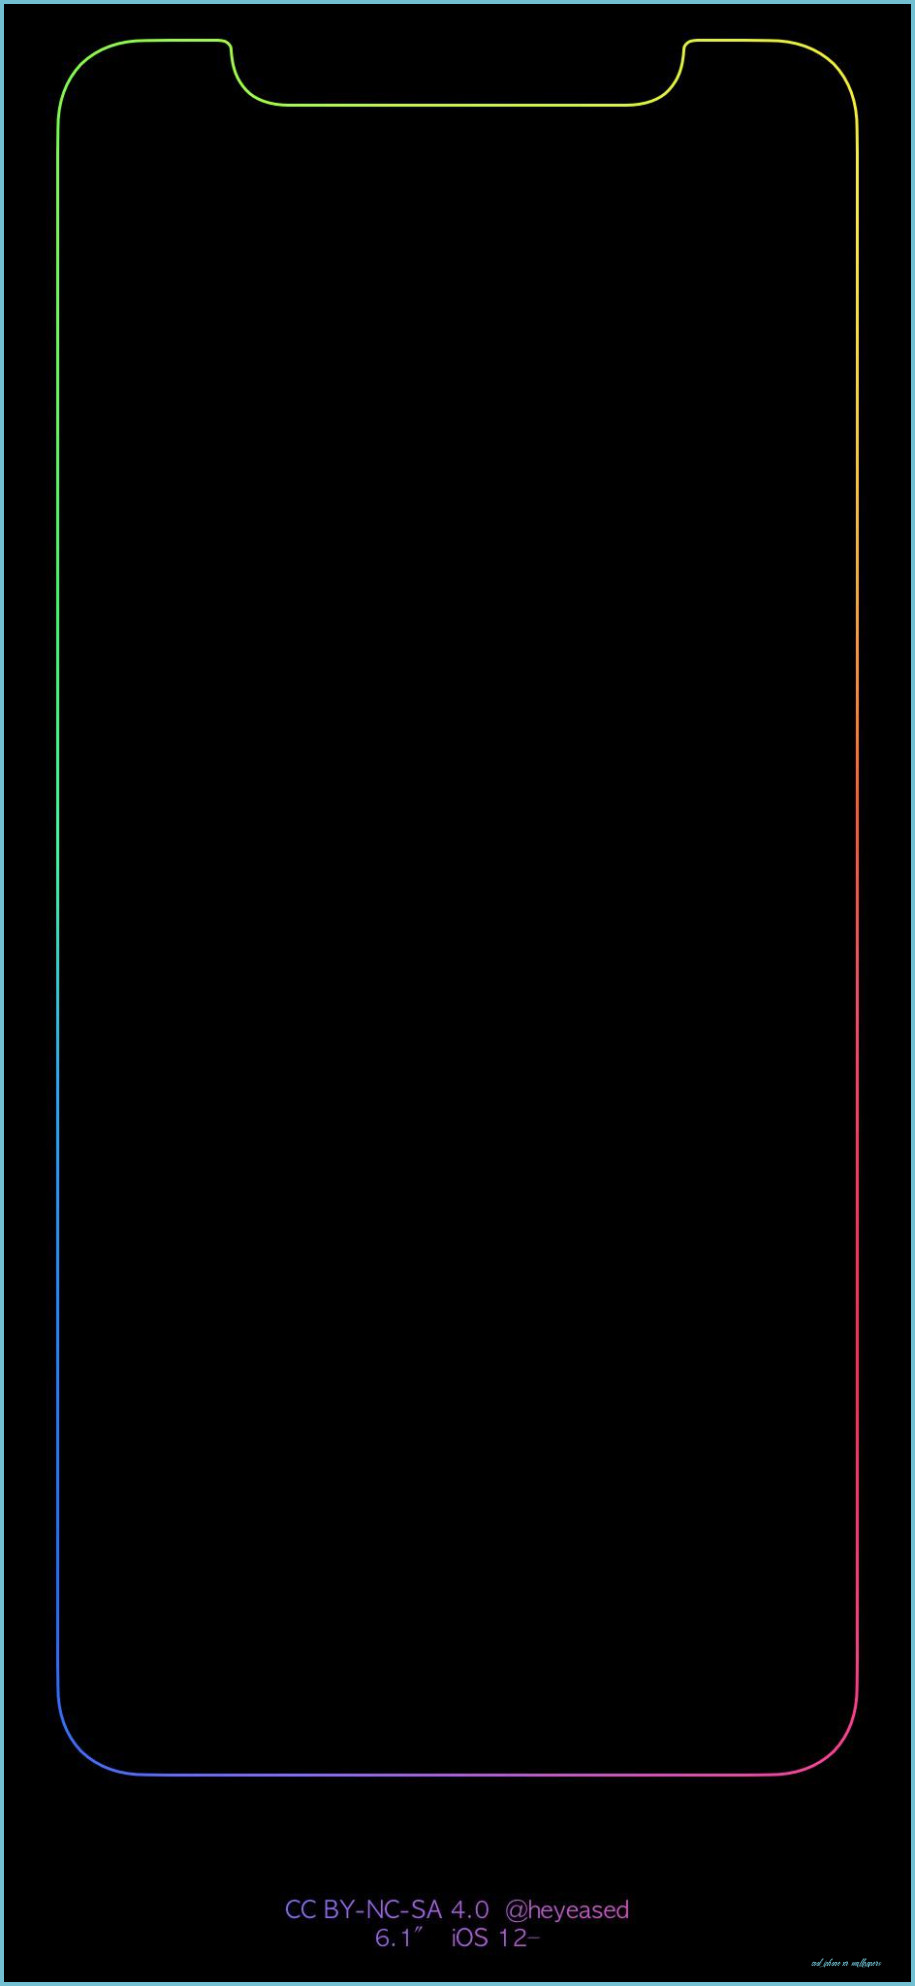 Here's A Wallpaper For The IPhone XR That Perfectly Borders The iPhone Xr Wallpaper